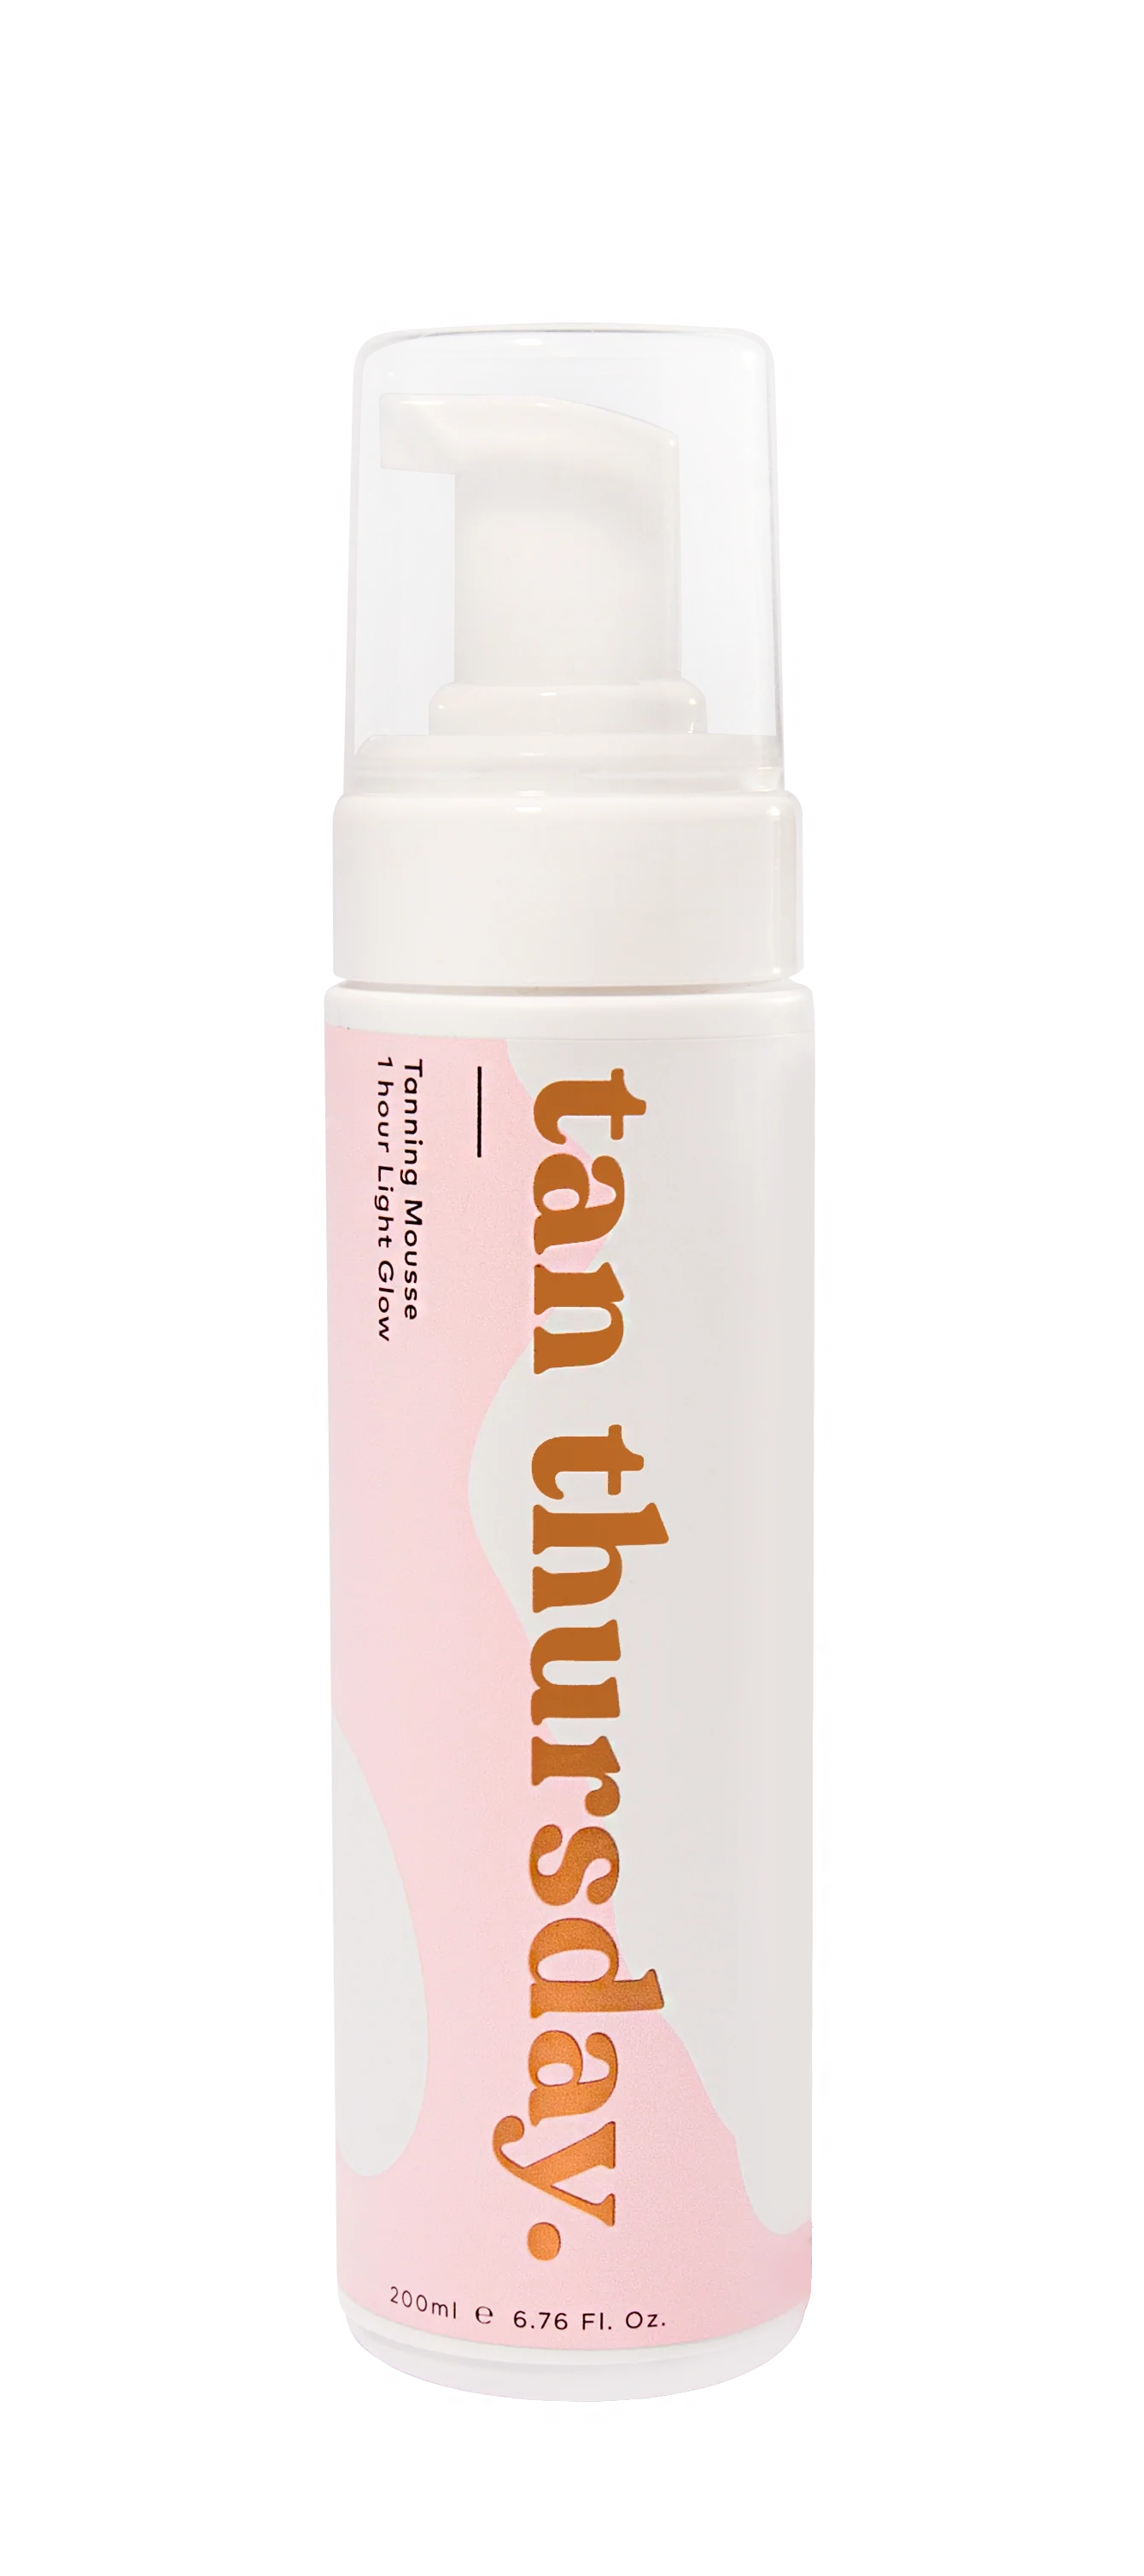 1 Hour Light Glow Tanning Mousse 200ml